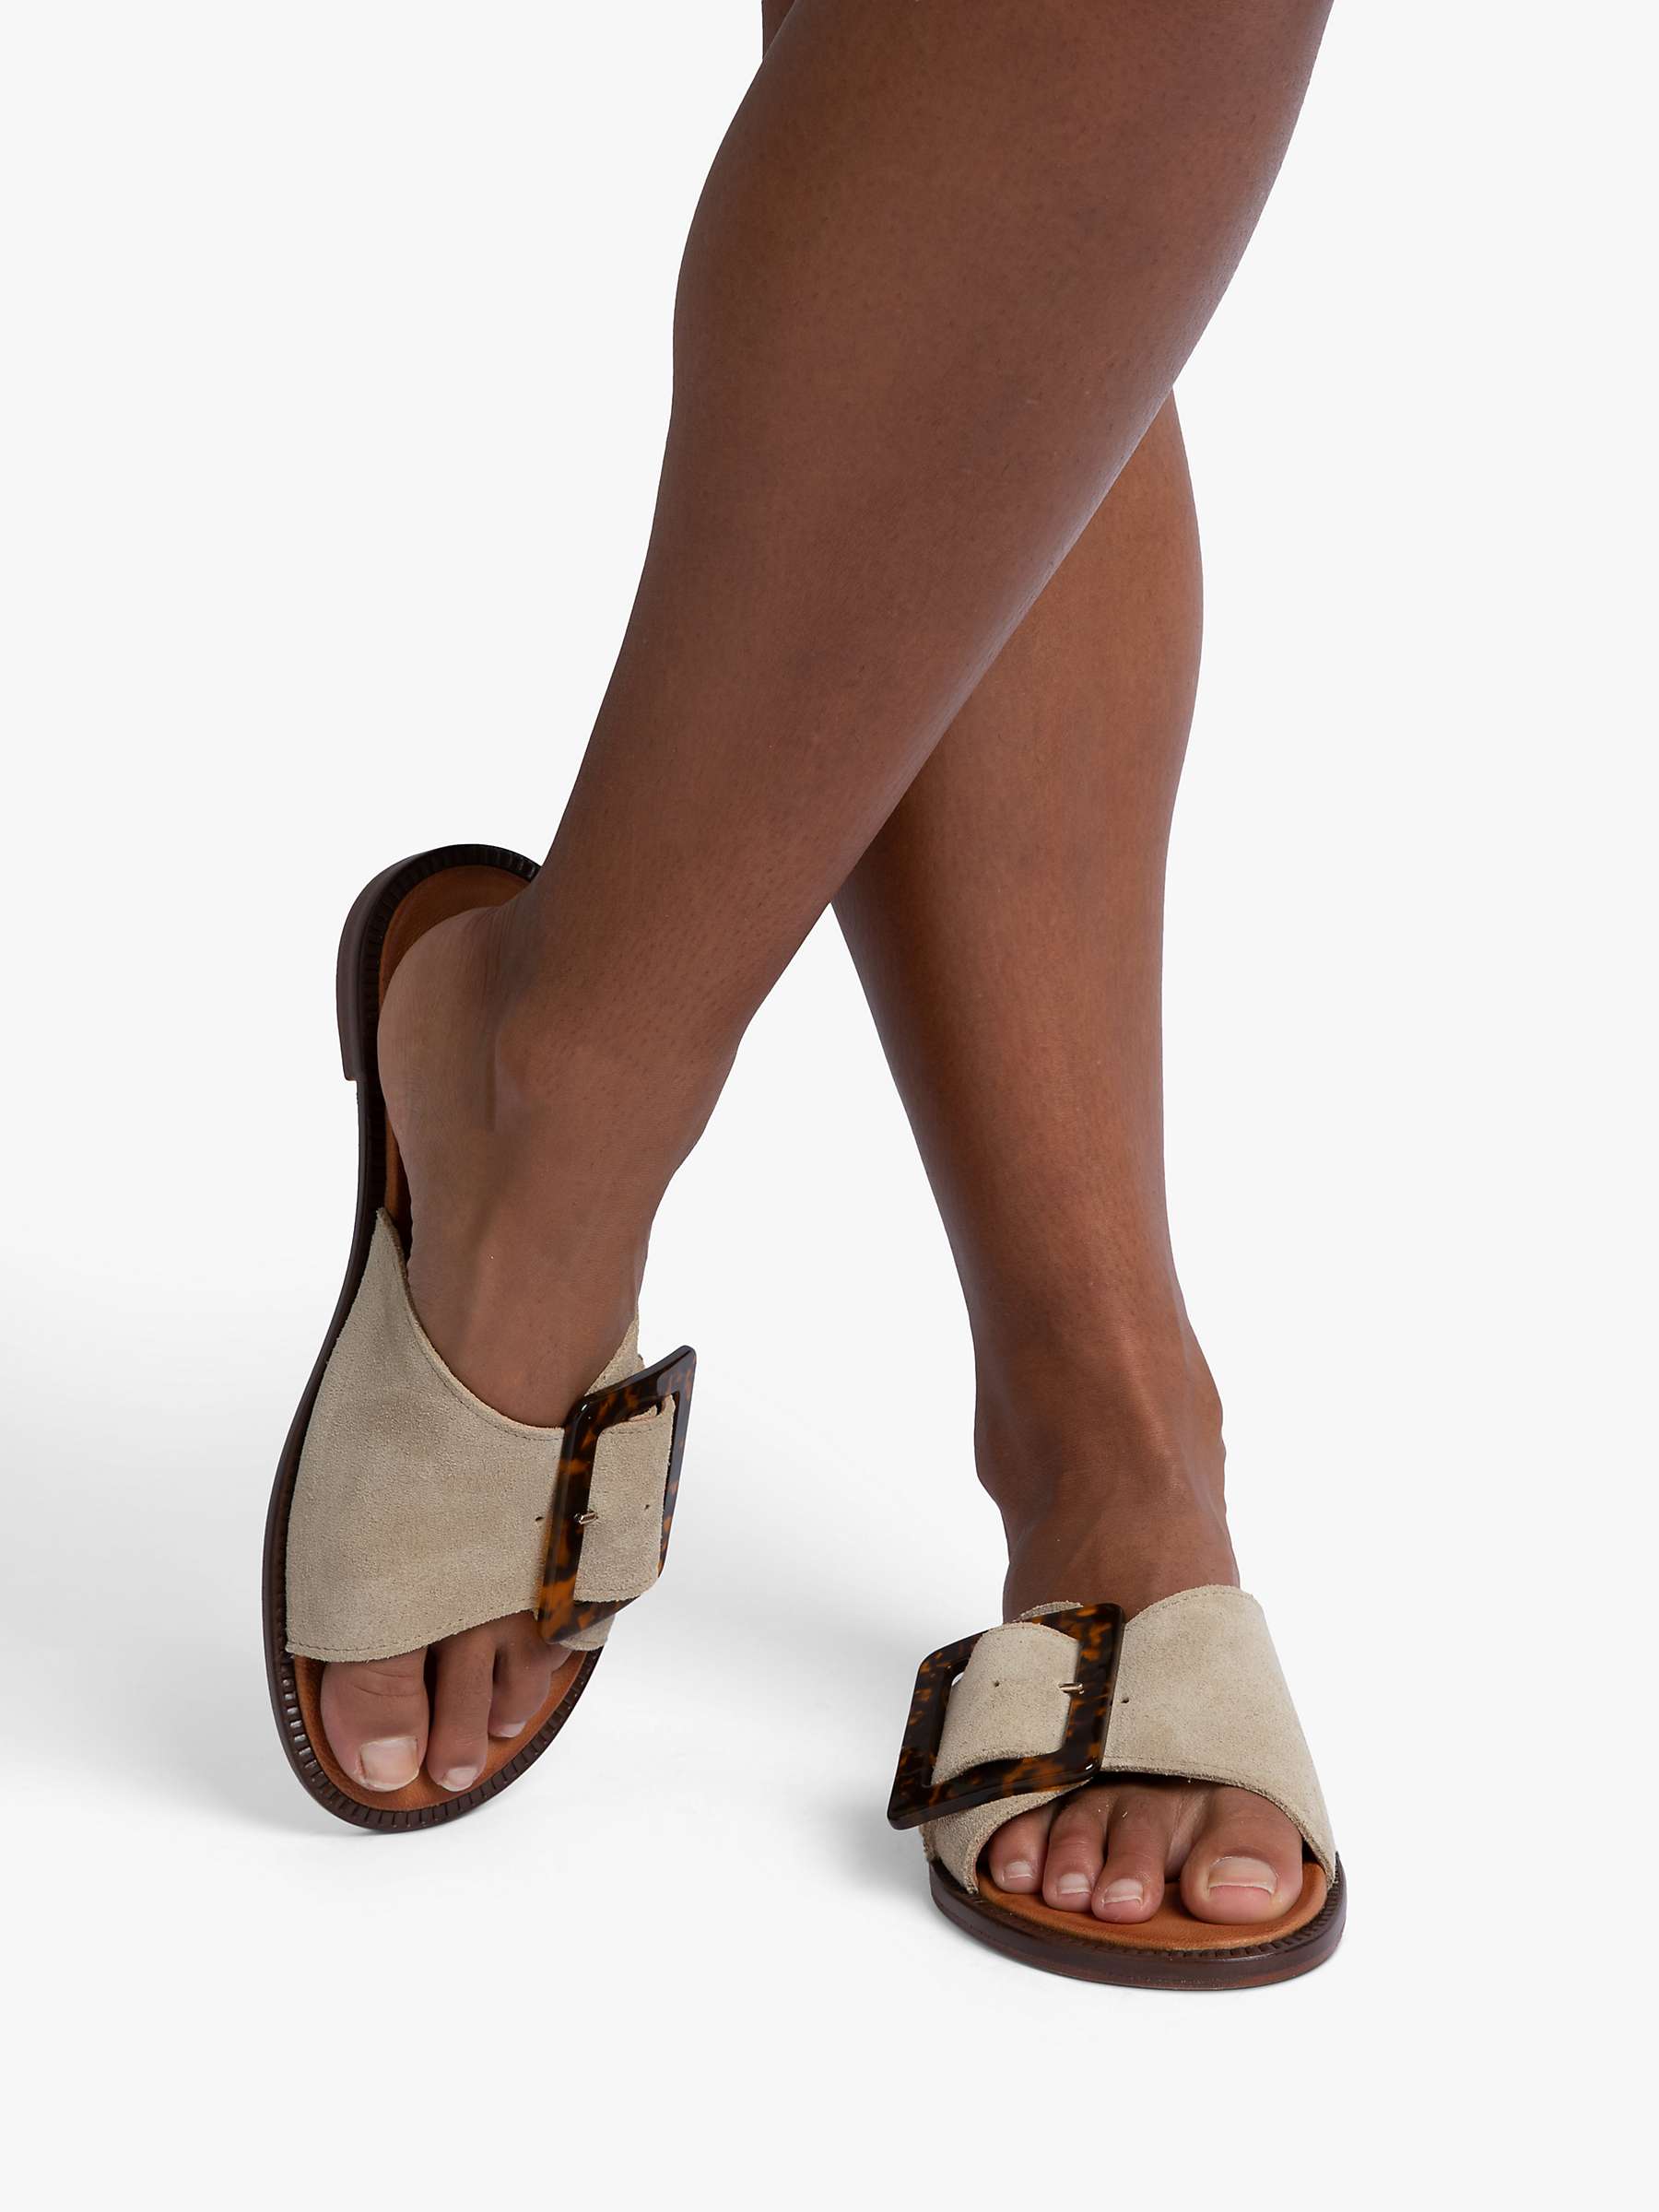 Buy Penelope Chilvers Biarritz Suede Buckle Sandals, Taupe Online at johnlewis.com